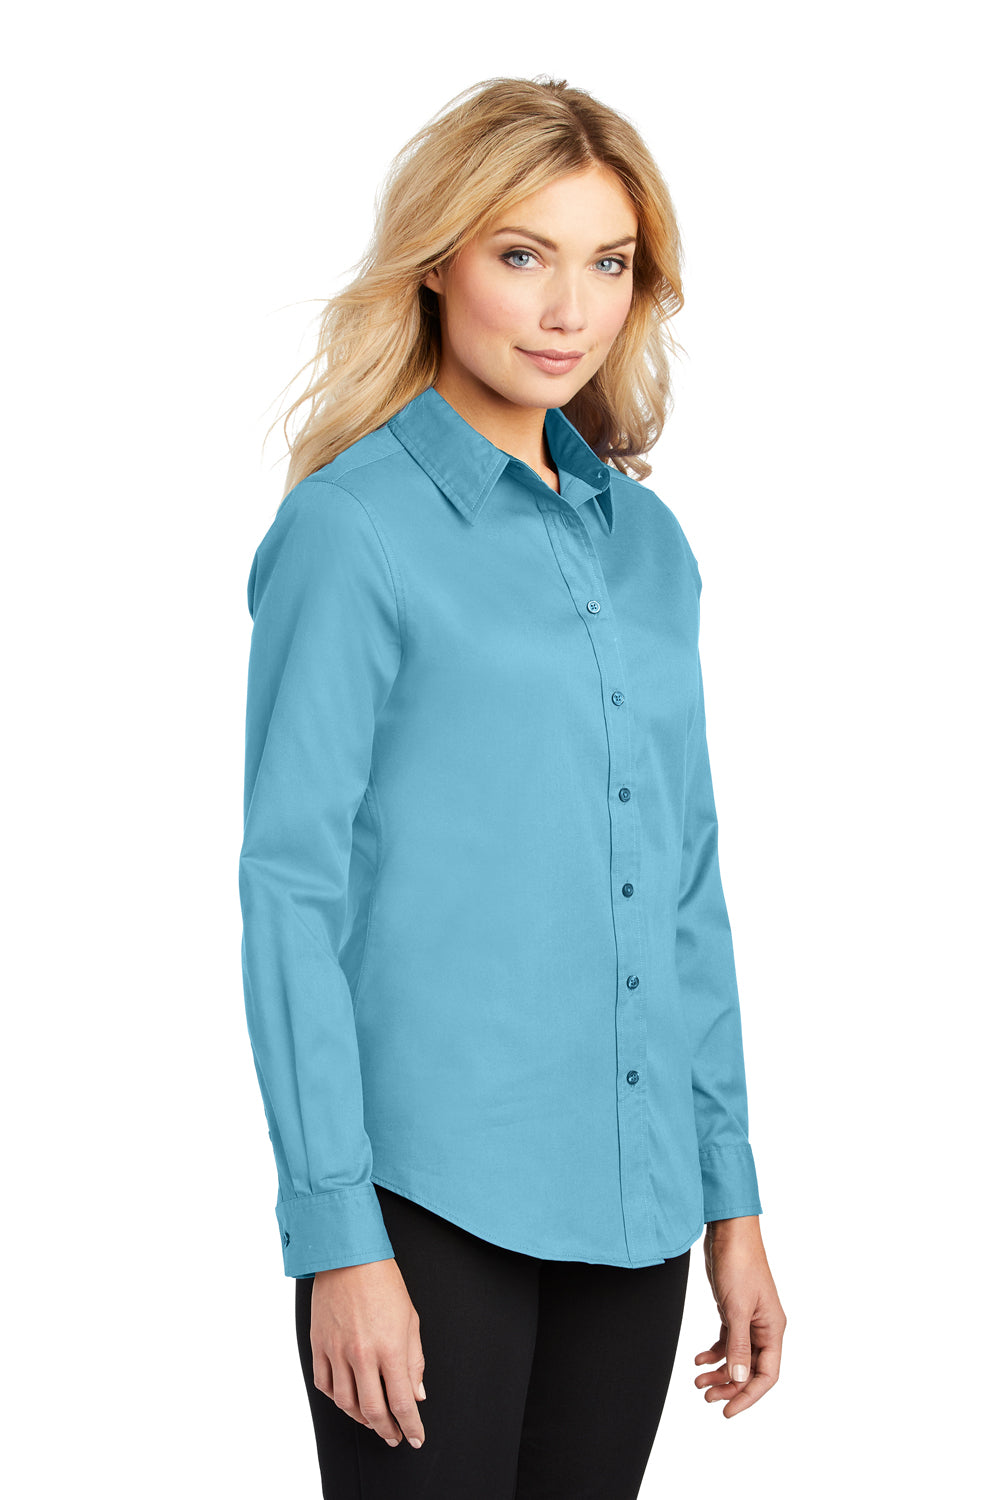 Port Authority L608 Womens Easy Care Wrinkle Resistant Long Sleeve Button Down Shirt Maui Blue 3Q